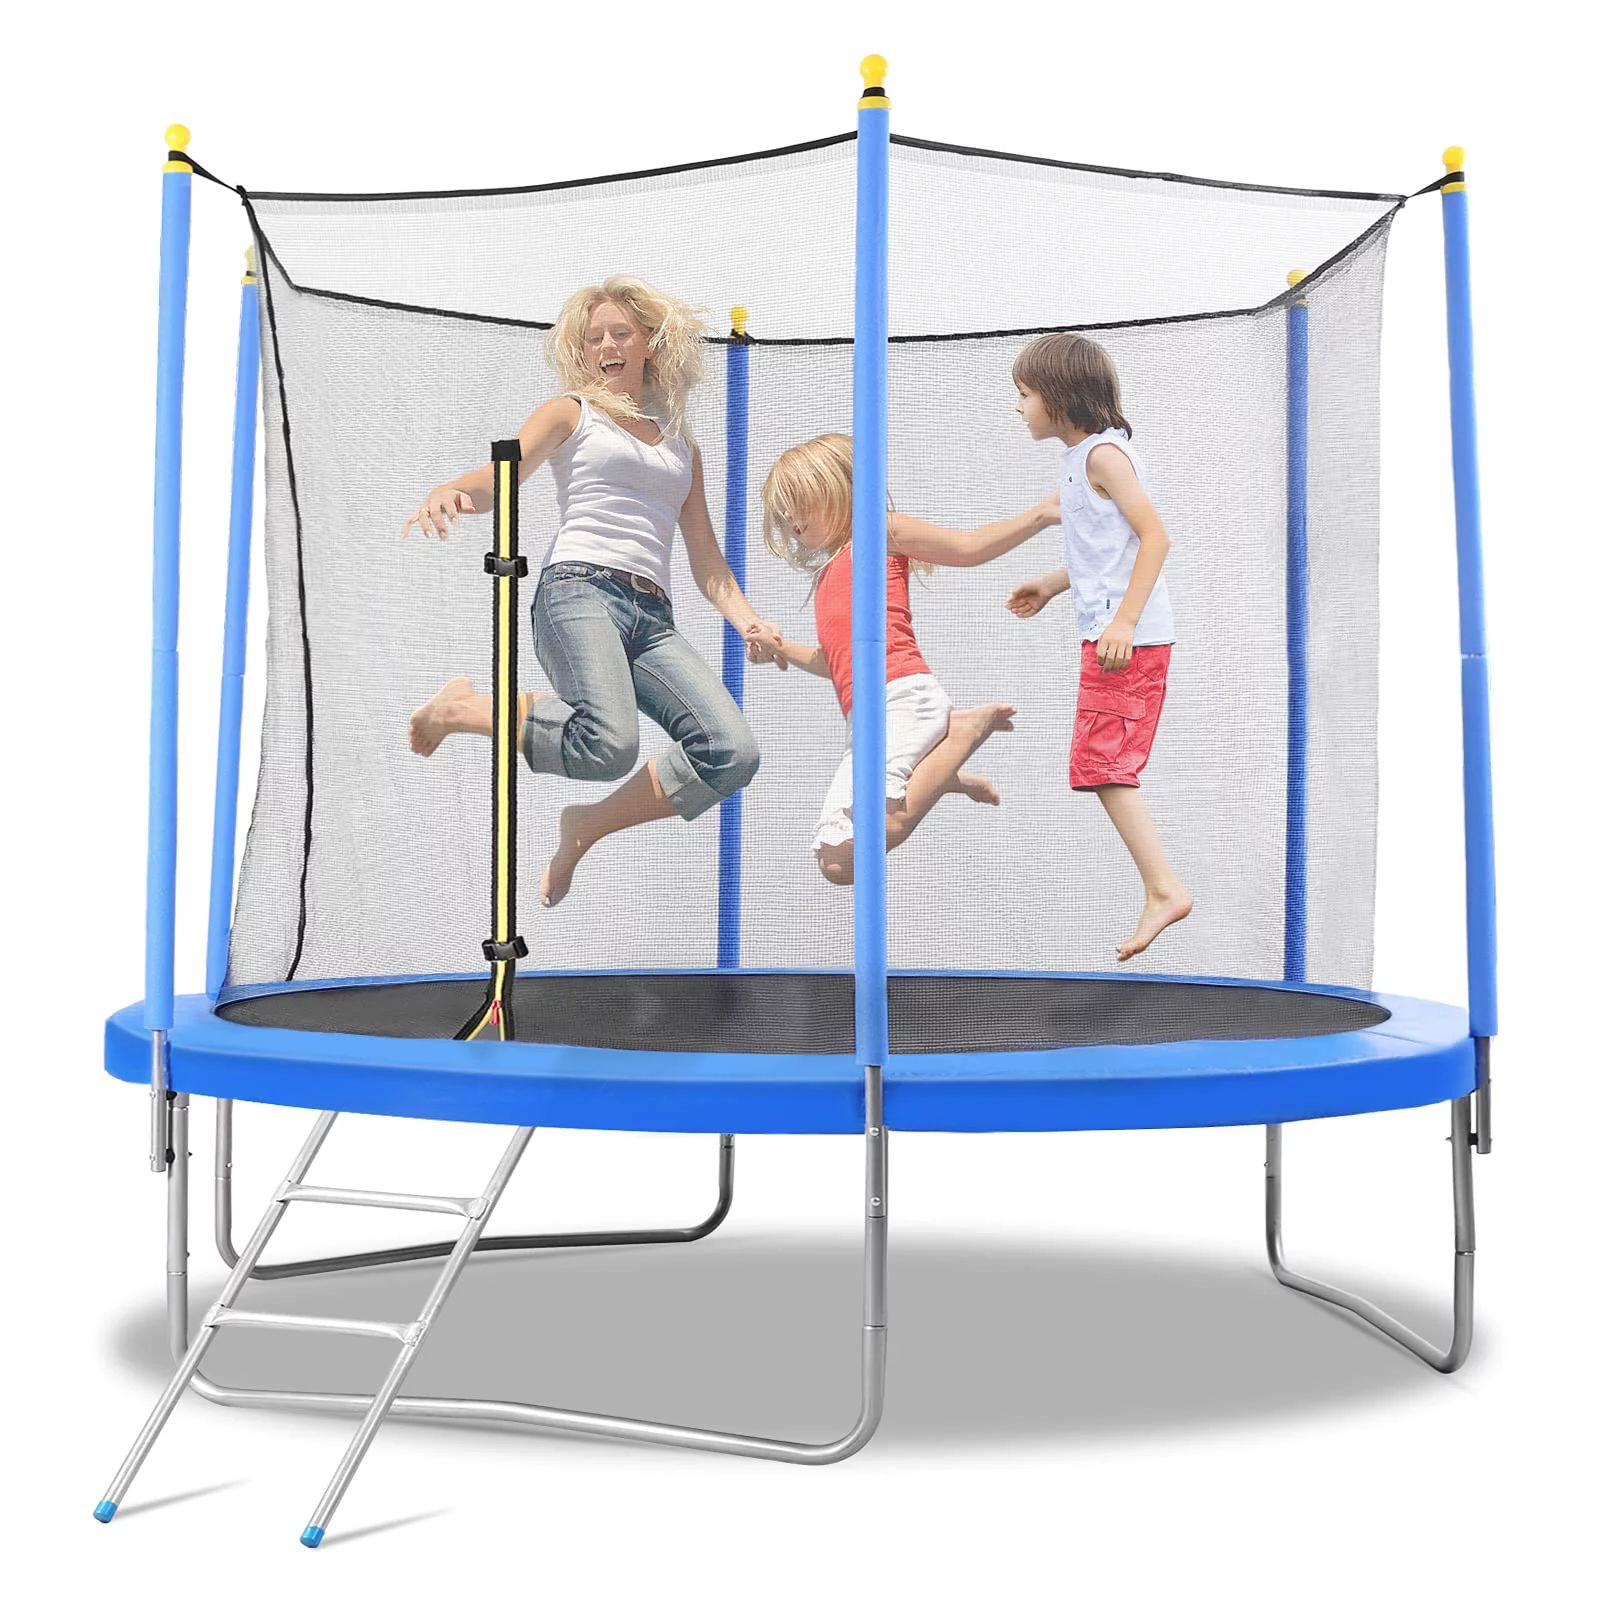 MaxKare 10Ft Trampoline for Kids Trampoline with Enclosure, 264 lbsCapacity | Walmart (US)